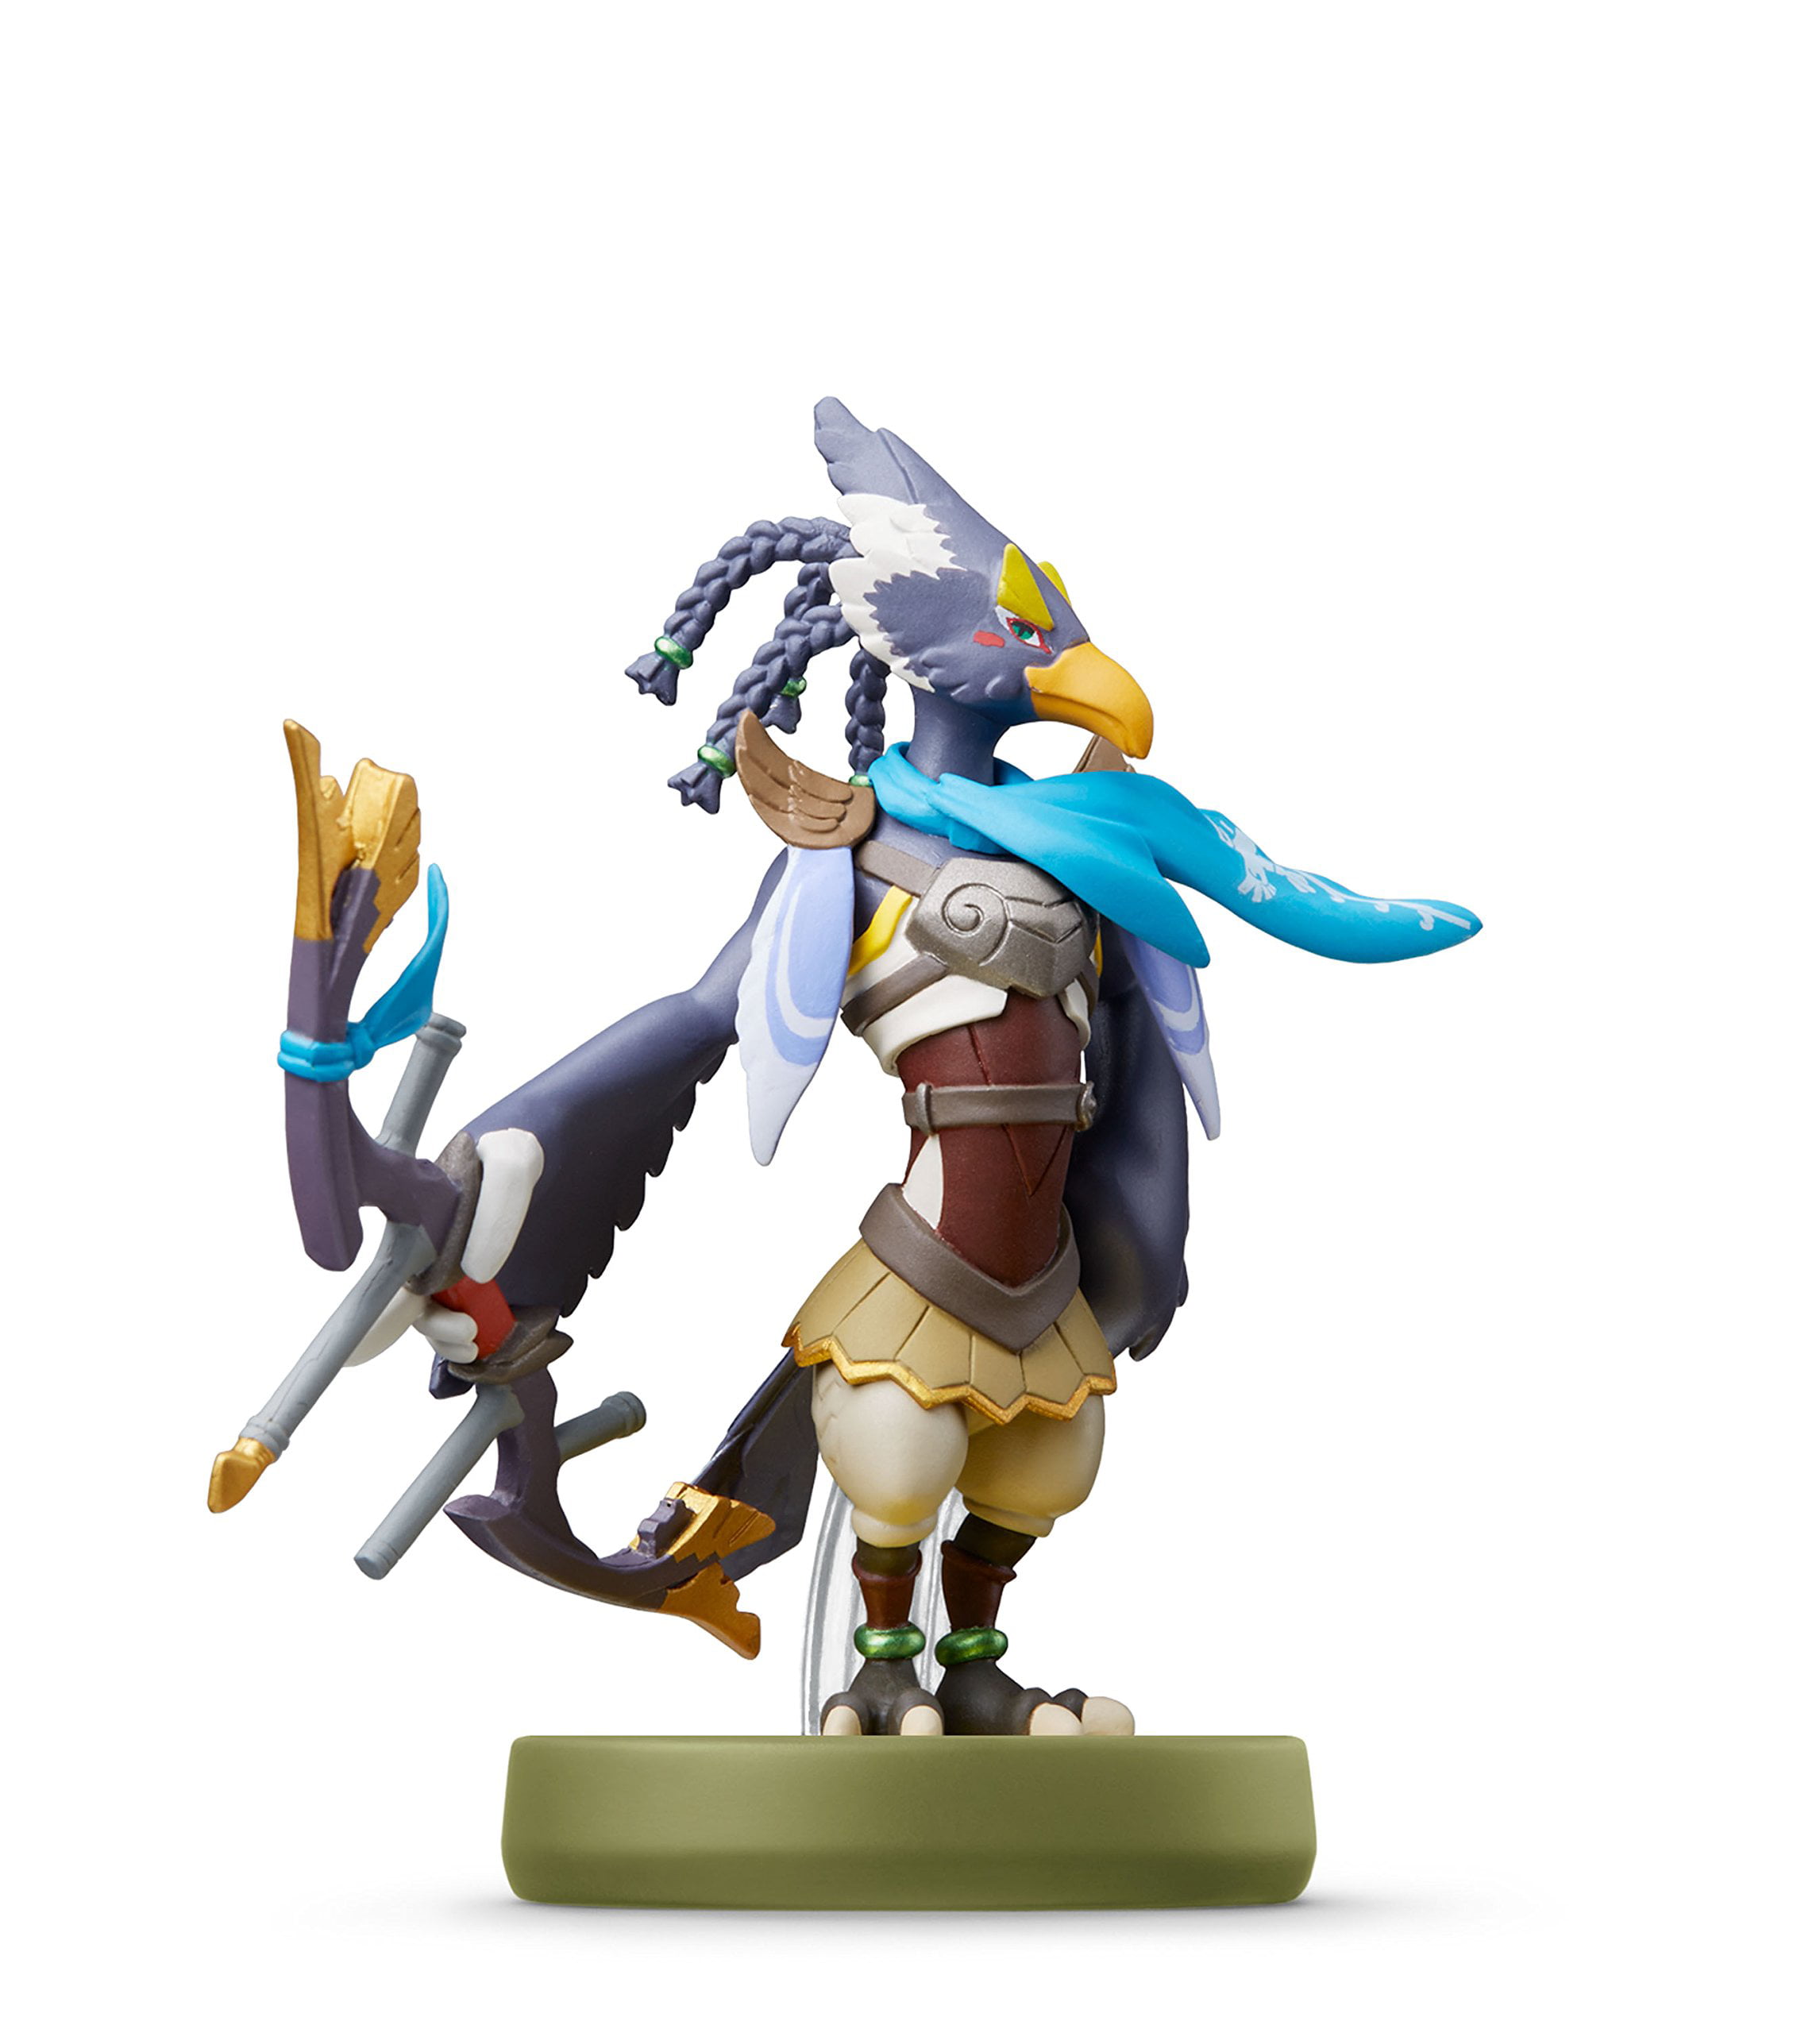 amiibo The Legend of Zelda: Breath of the Wild Series Figure (Zelda) for  Wii U, New 3DS, New 3DS LL / XL, SW - Bitcoin & Lightning accepted